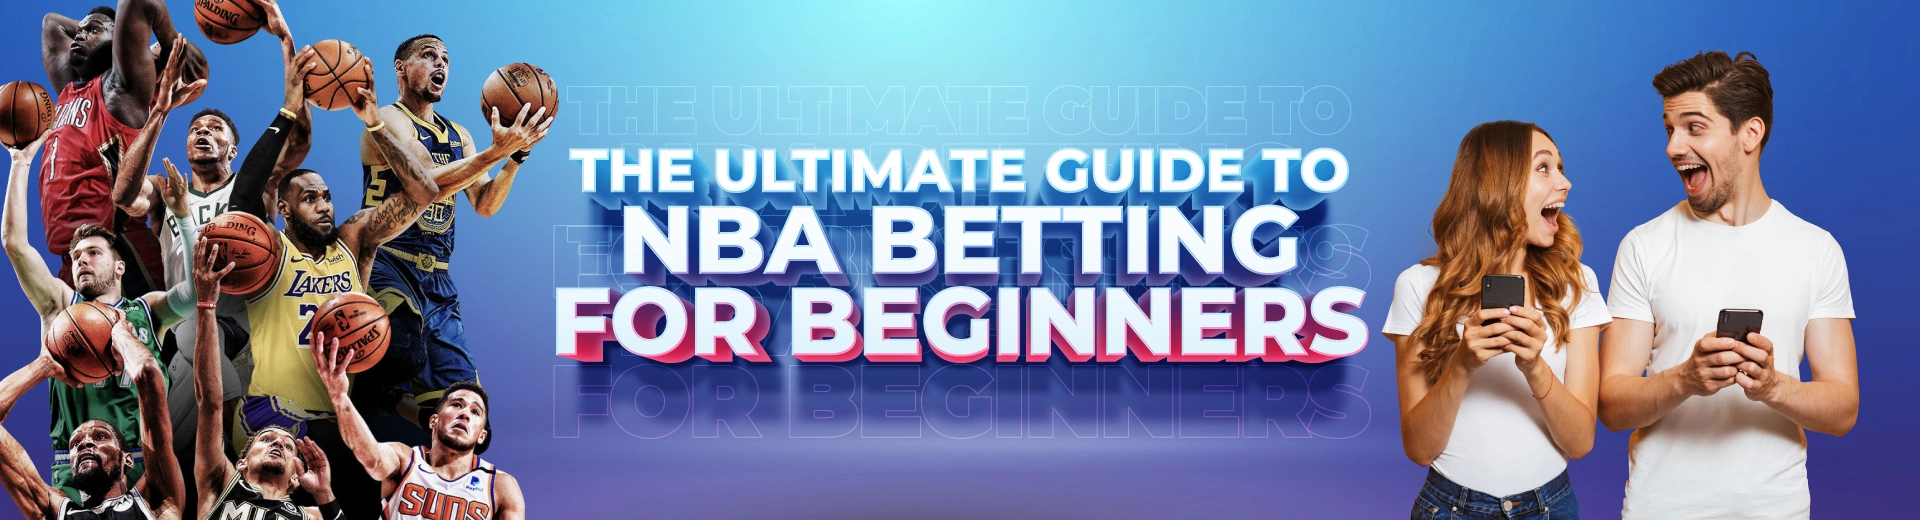 The Ultimate Guide to NBA Betting for Beginners